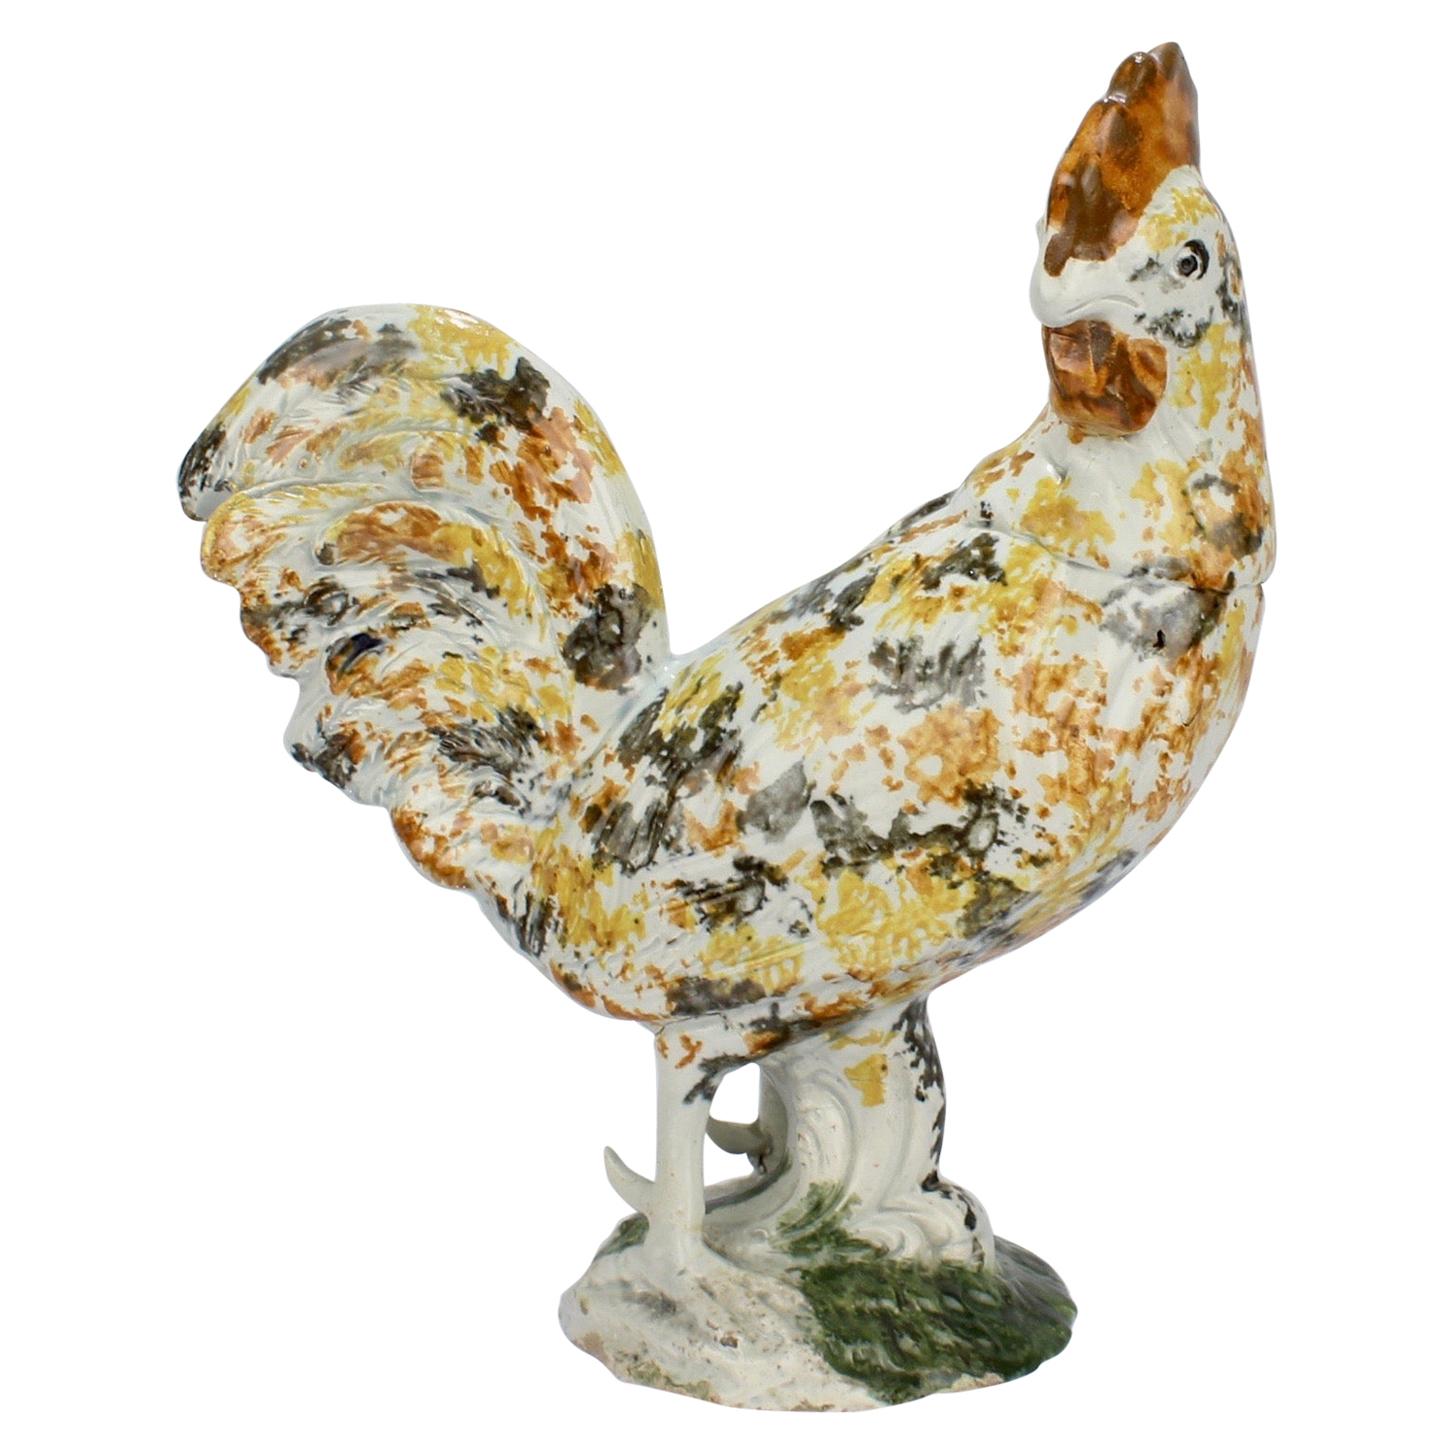 Antique English Staffordshire Prattware Pottery Rooster or Cockrel Figurine For Sale